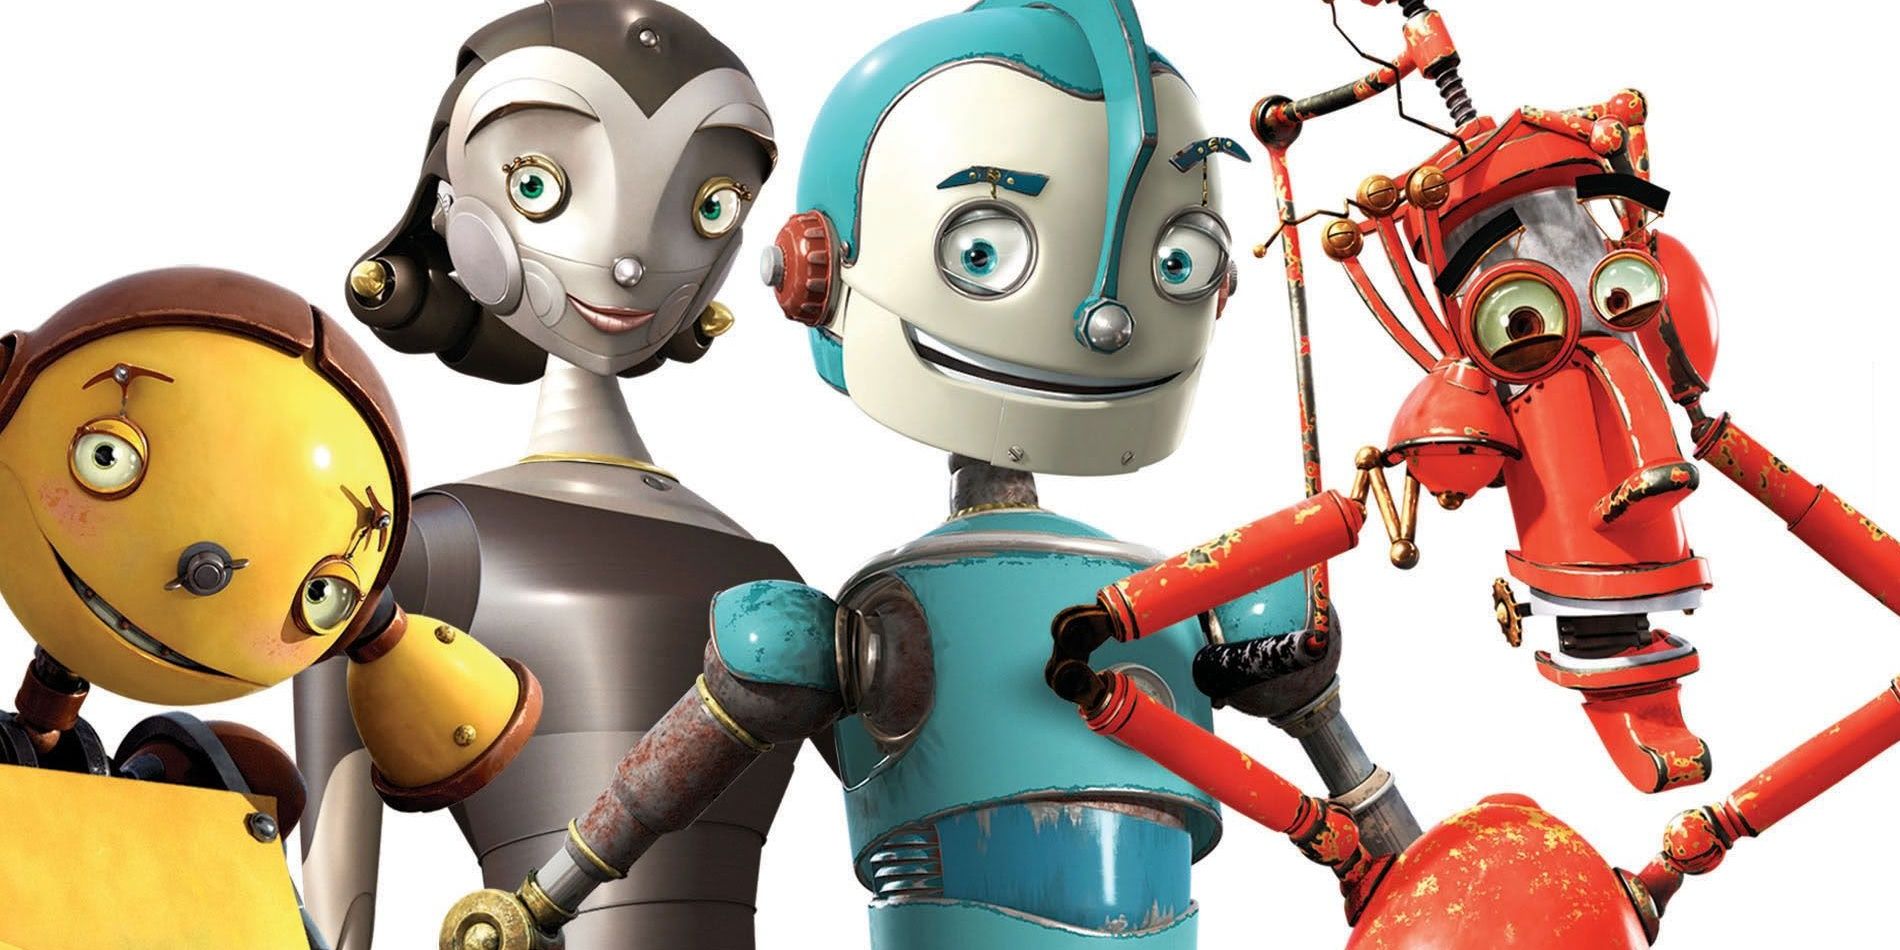 Poster for Robots featuring the lead cast